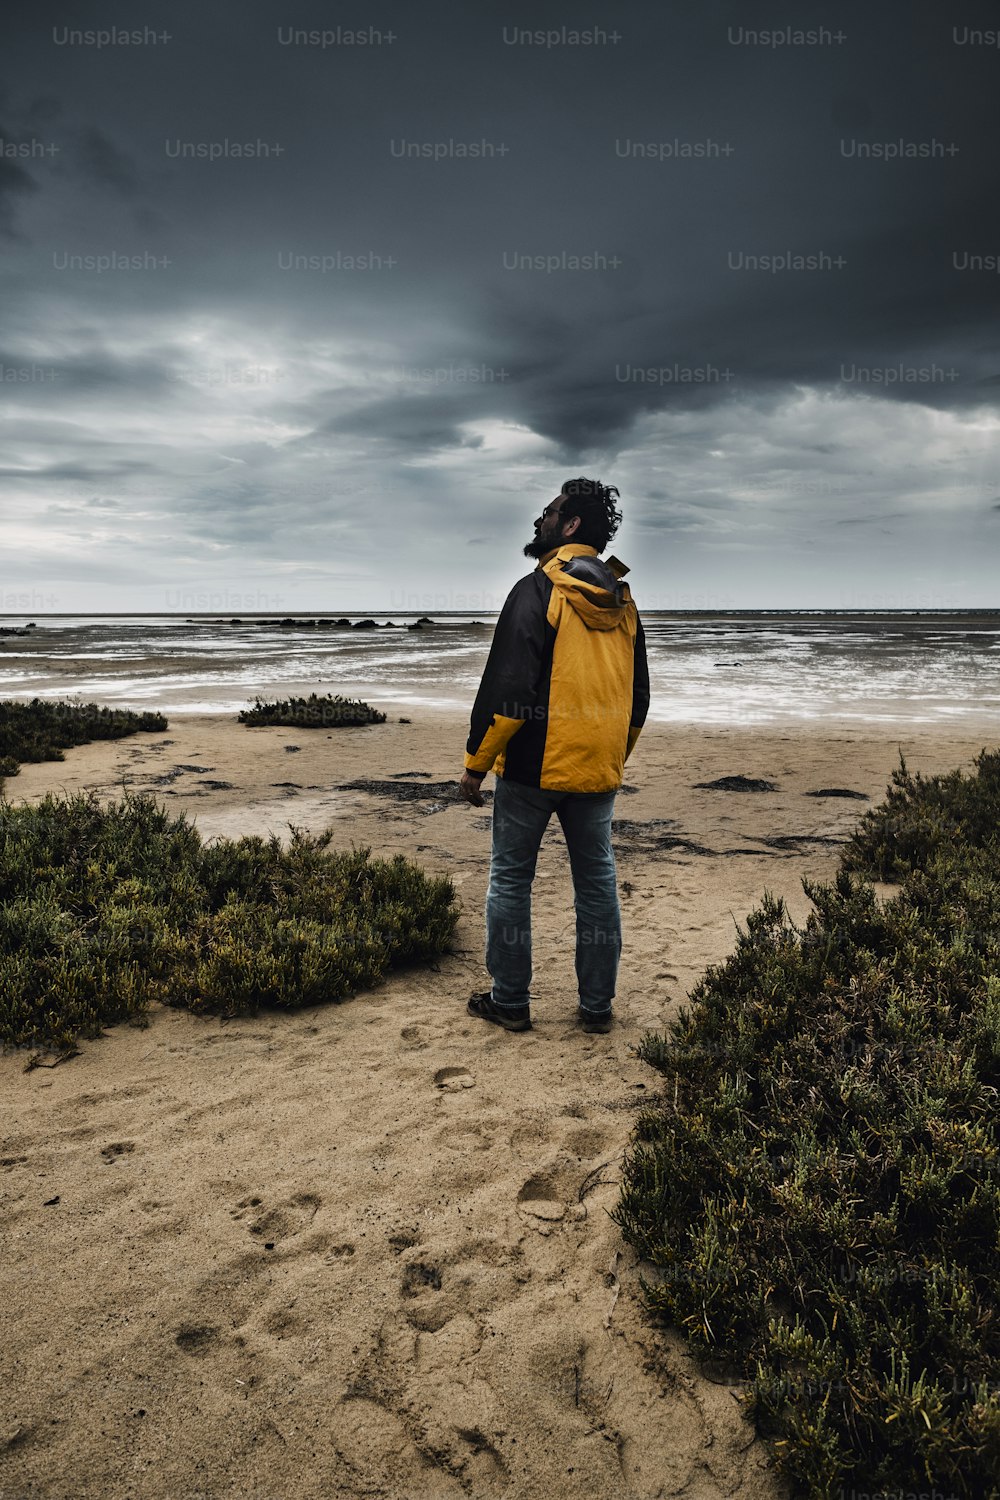 Epic standing man against bad weather and black clouds in background at the beach. Winter season adventure leisure activity people concept.